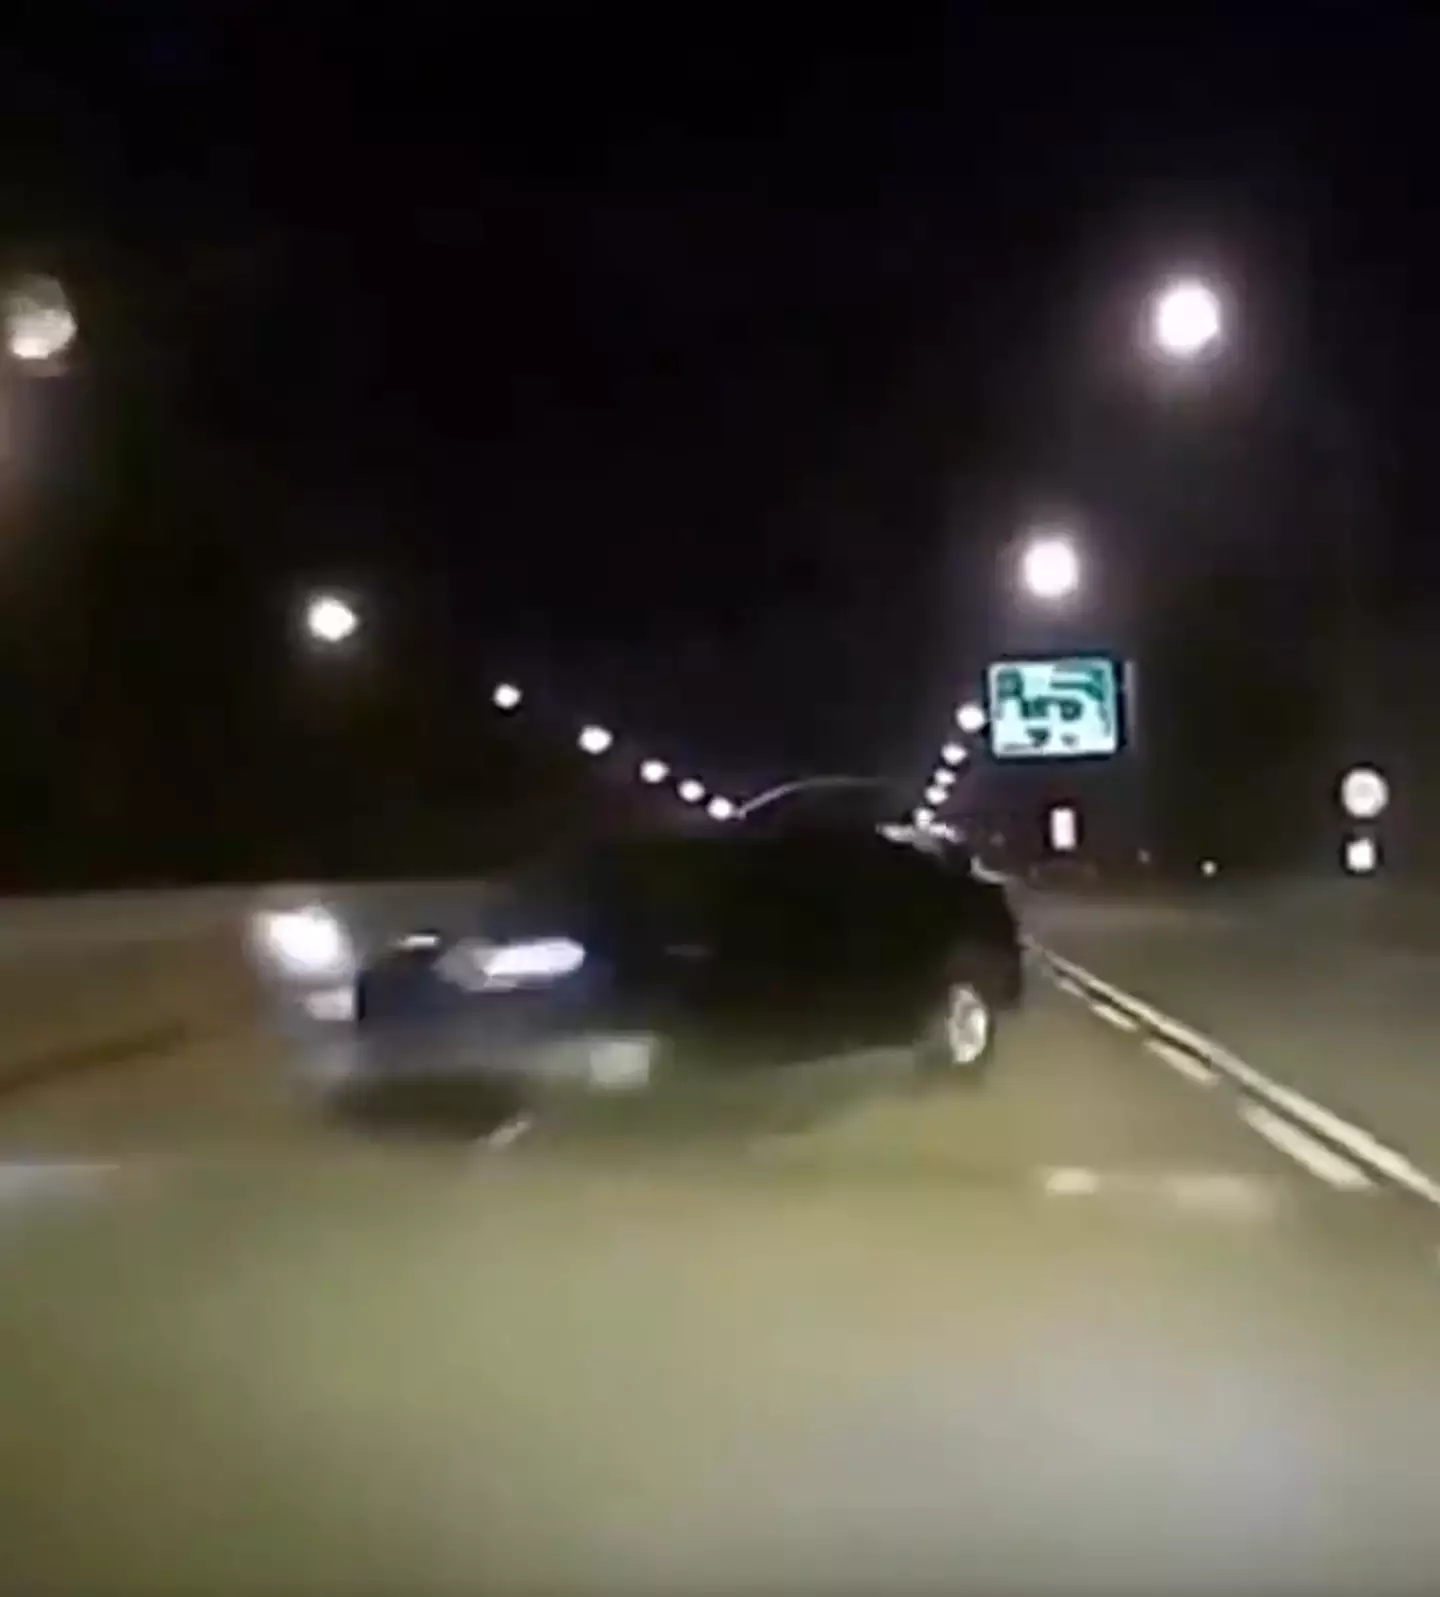 The car accident was seemingly caught via dashcam footage.